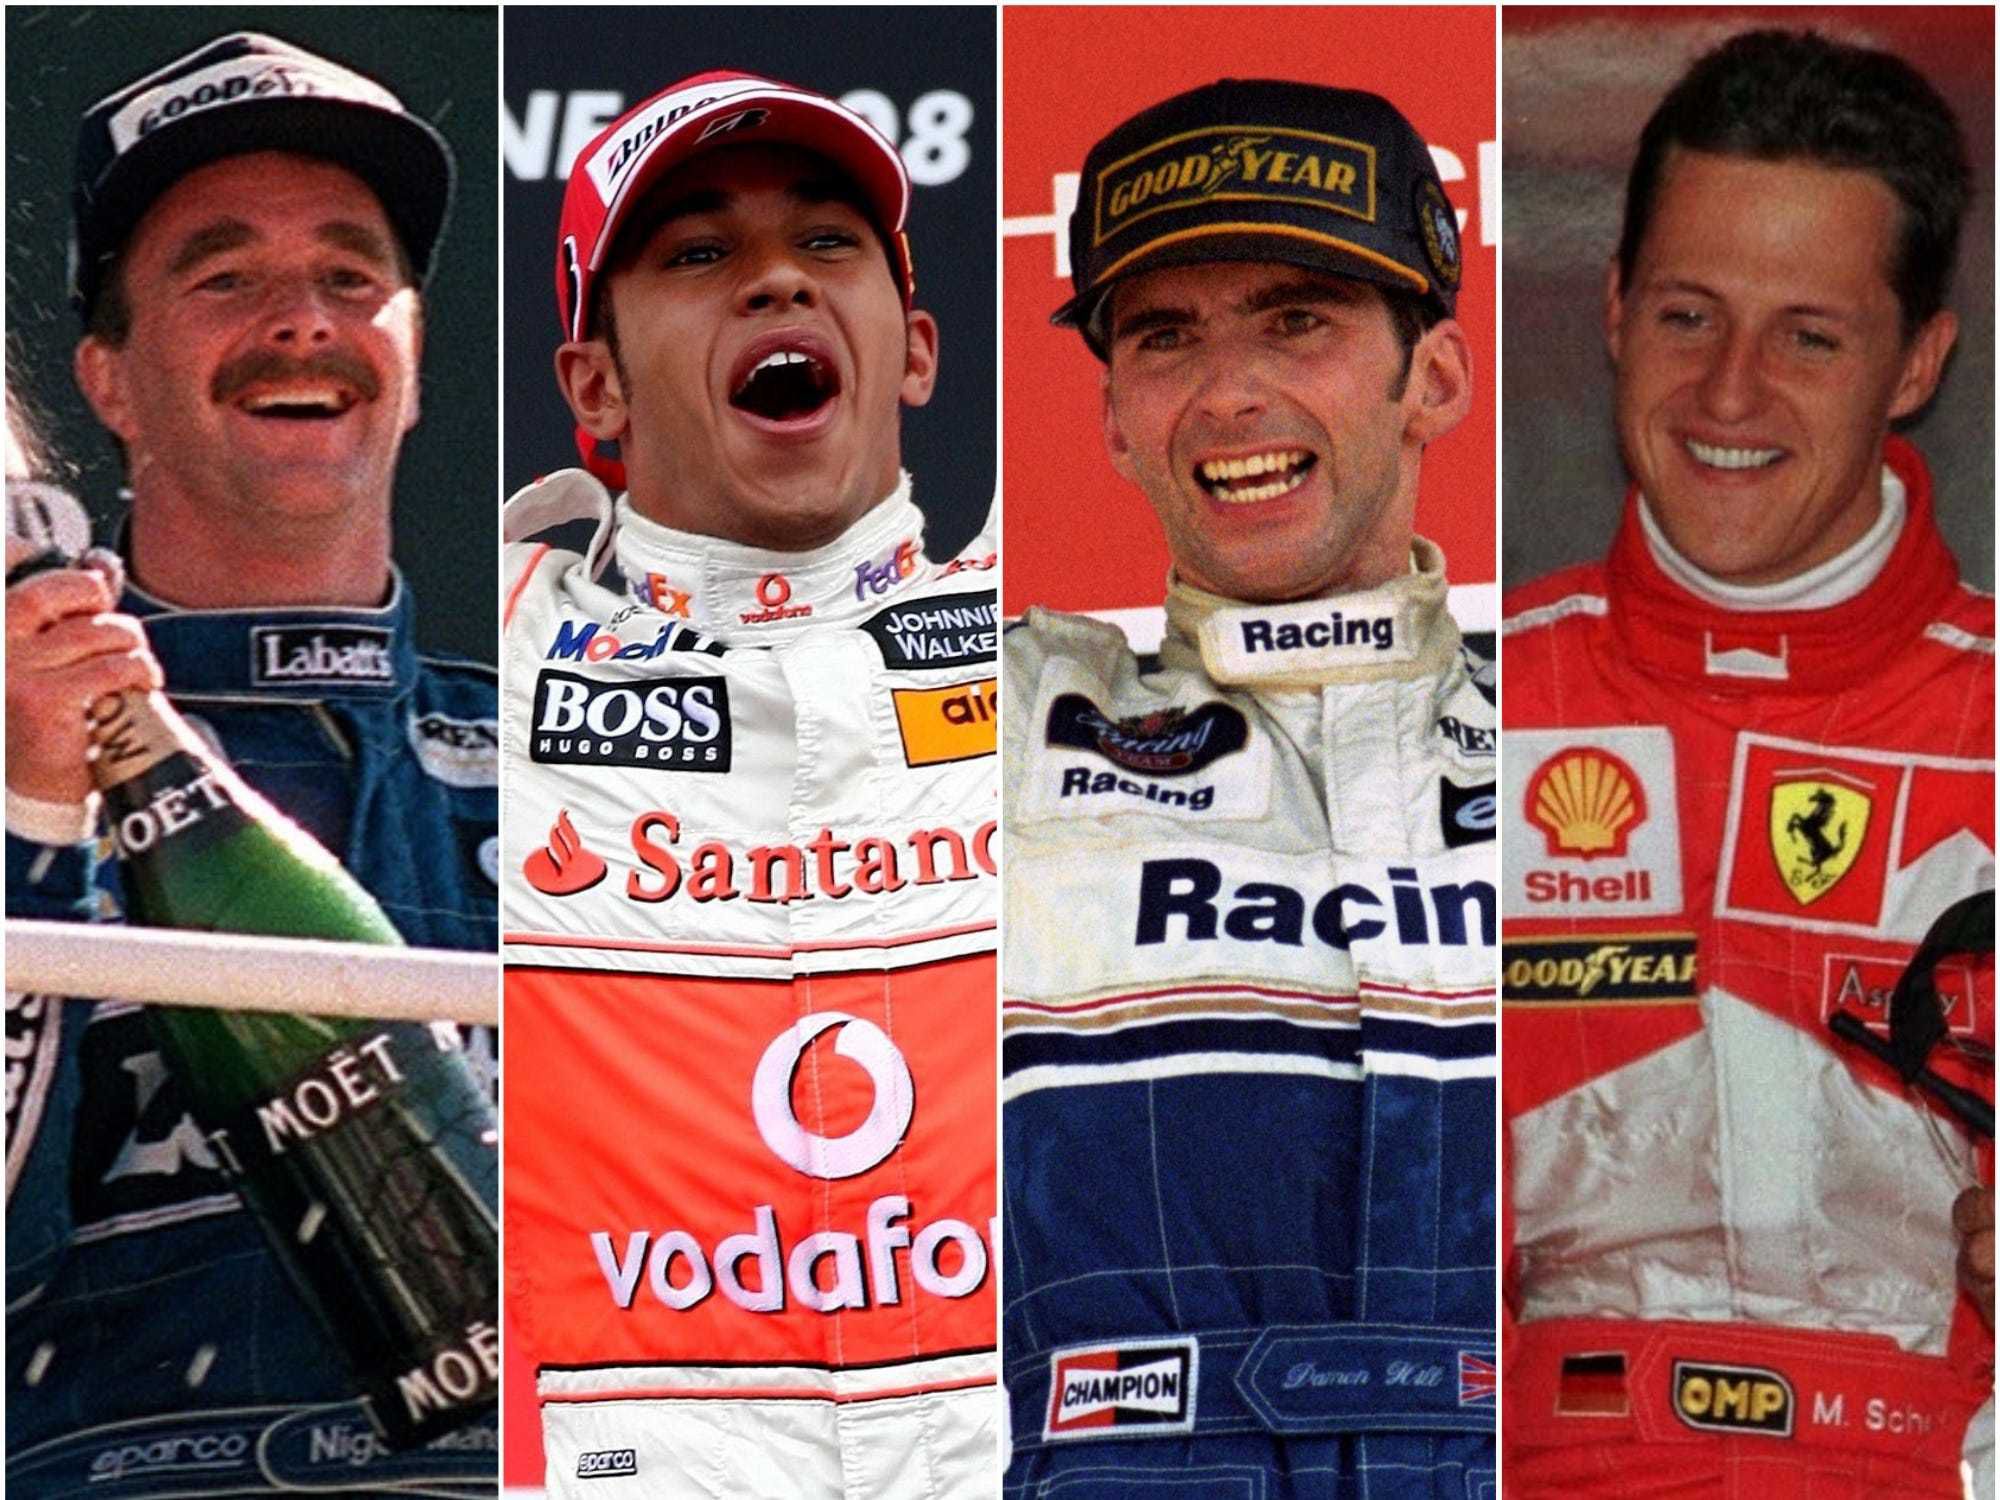 5 memorable British Grand Prix races staged at Silverstone